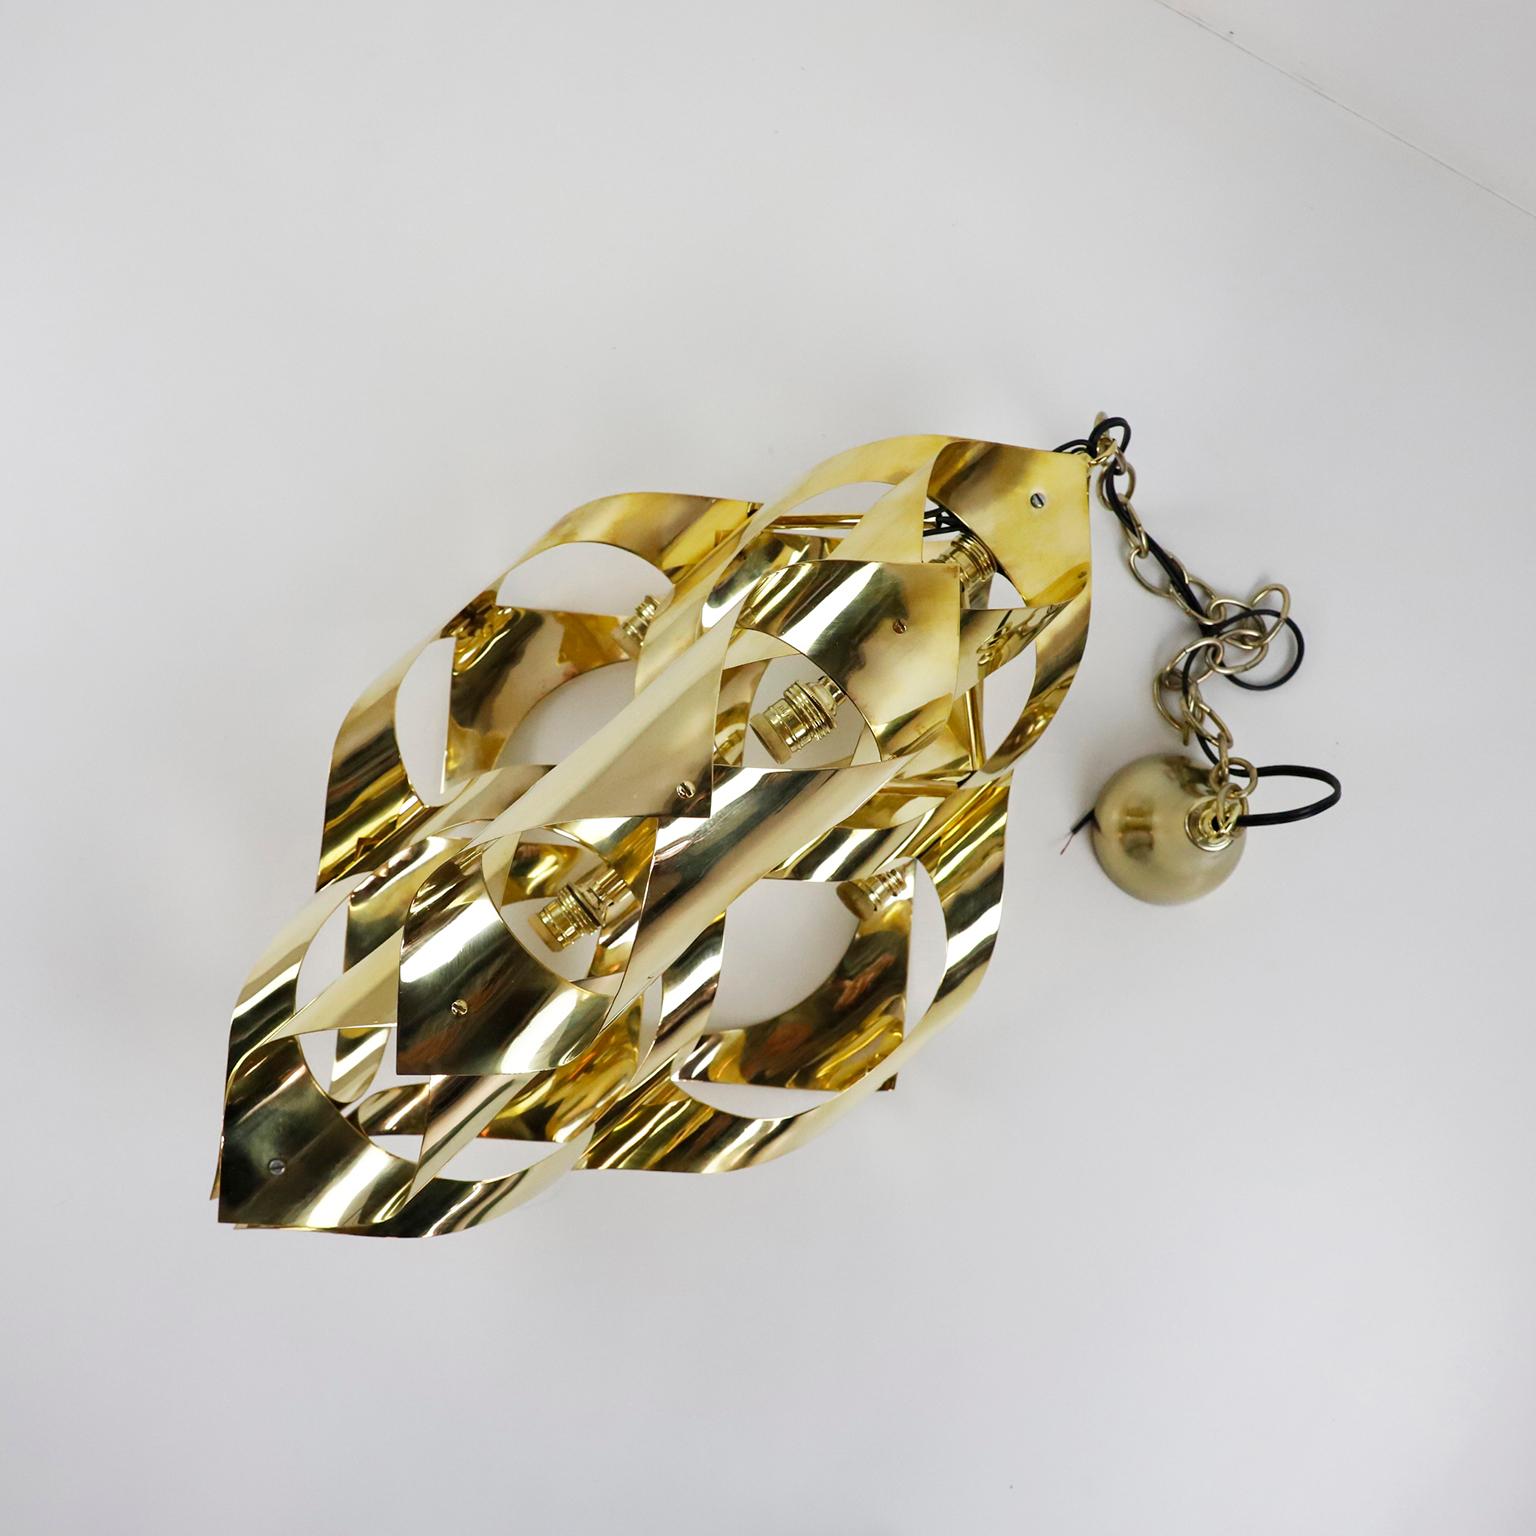 Circa 1960. We offer this Mid Century Italian Pendant Lamp. Beautiful design made in solid bronze plates. The lamp has just been electrified and all the cables have been changed except the original sockets made of bronze which have been polished